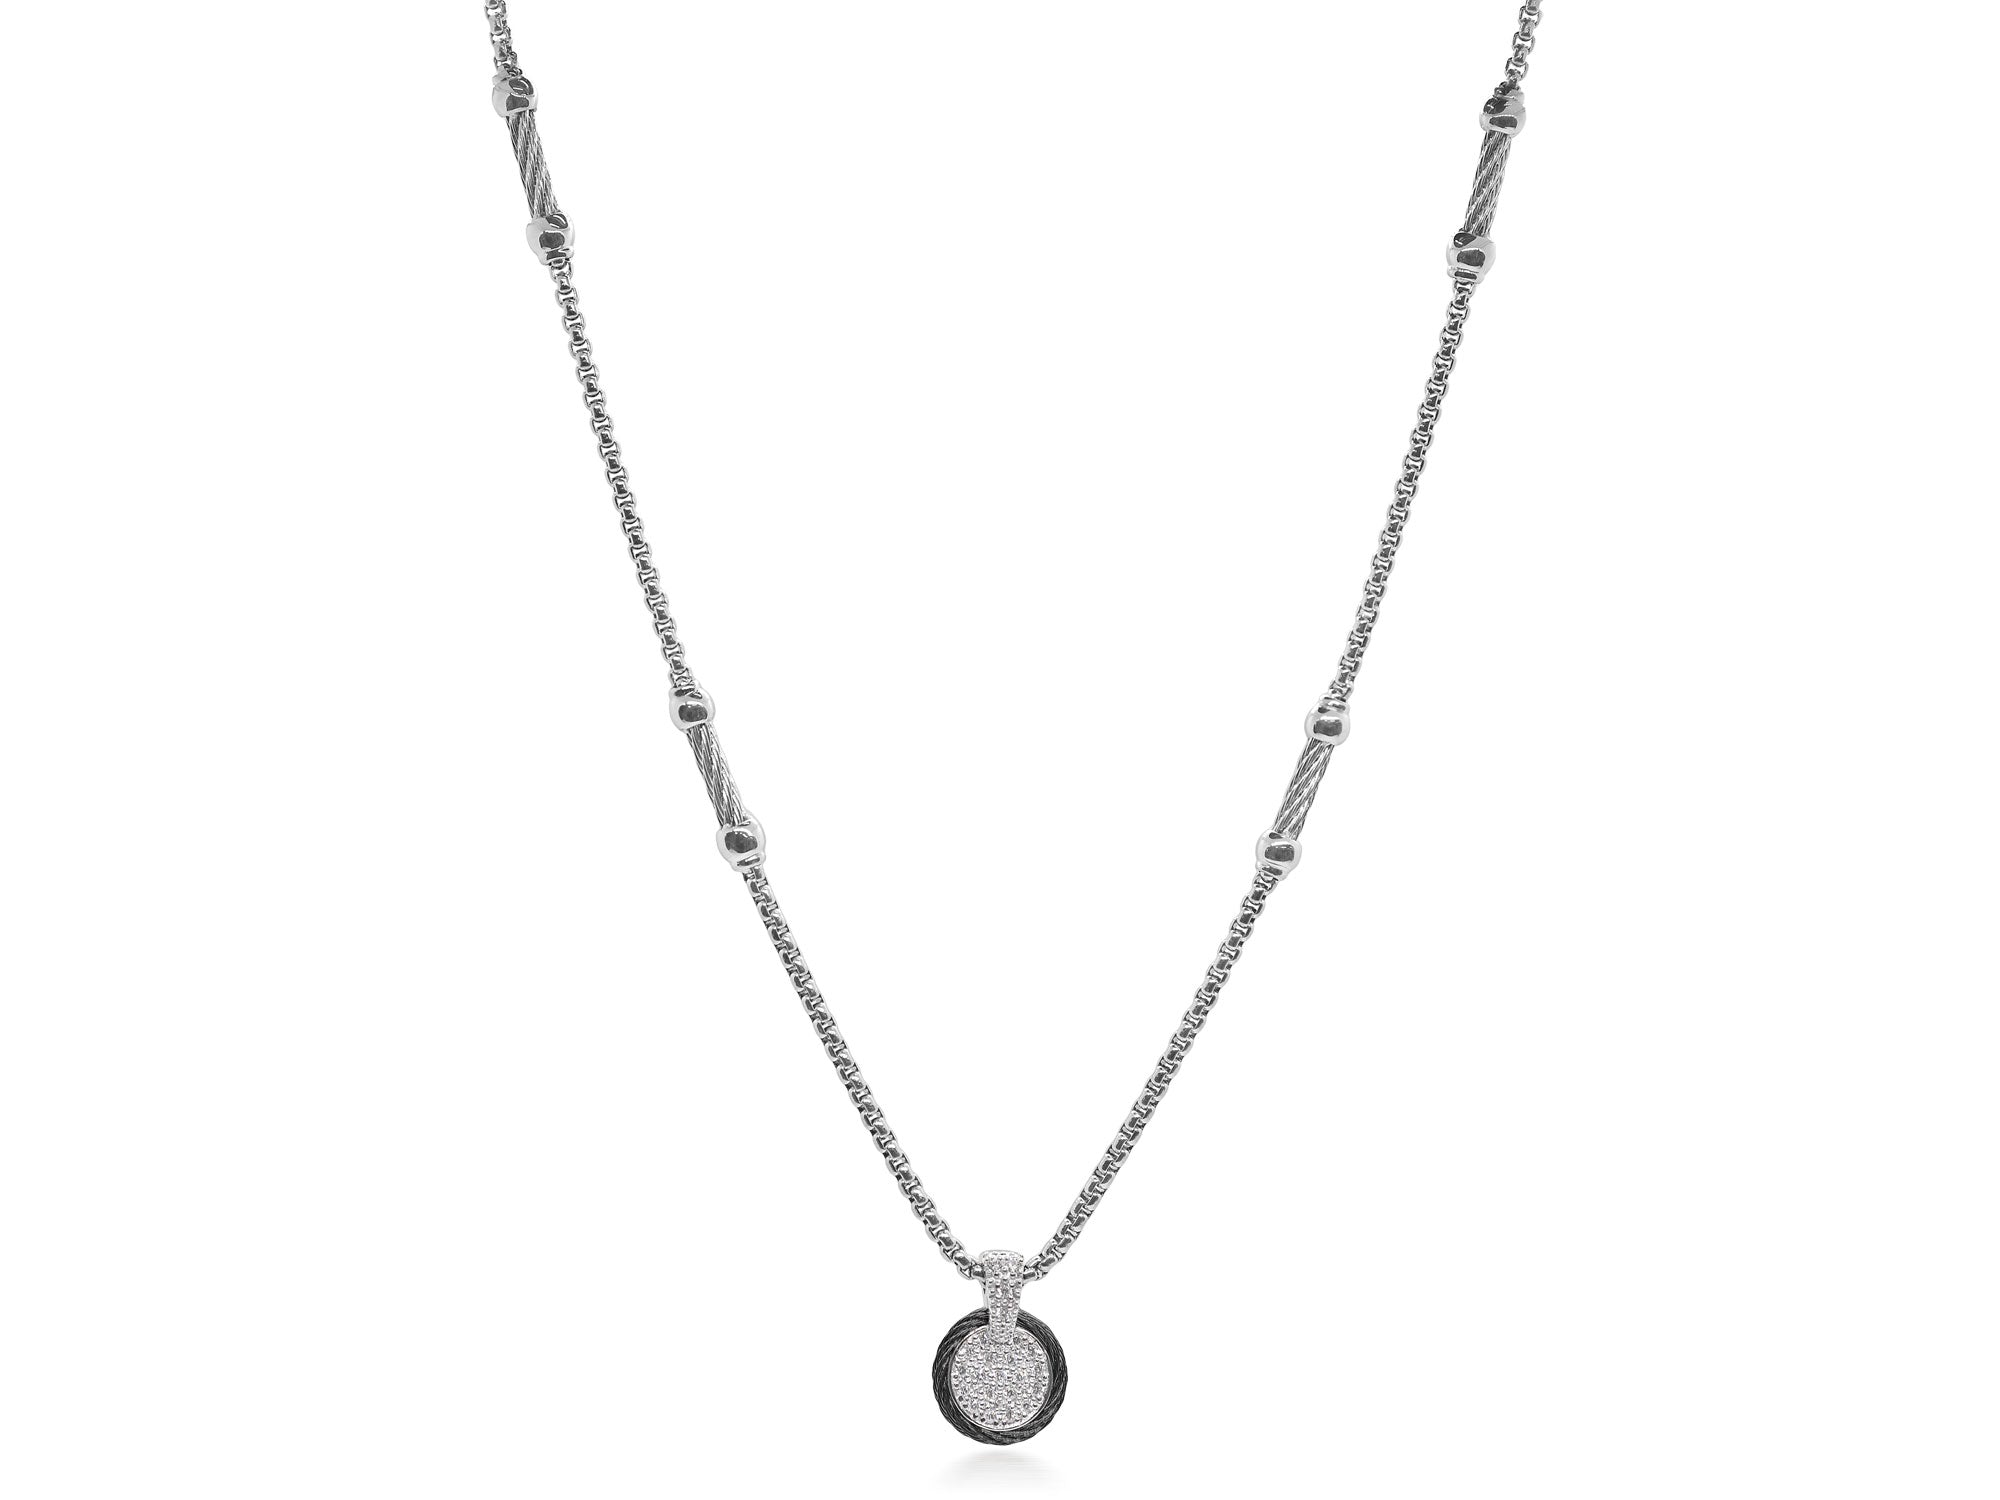 Black & Grey Chain Expressions Scattered Necklace with 14kt White Gold & Diamonds